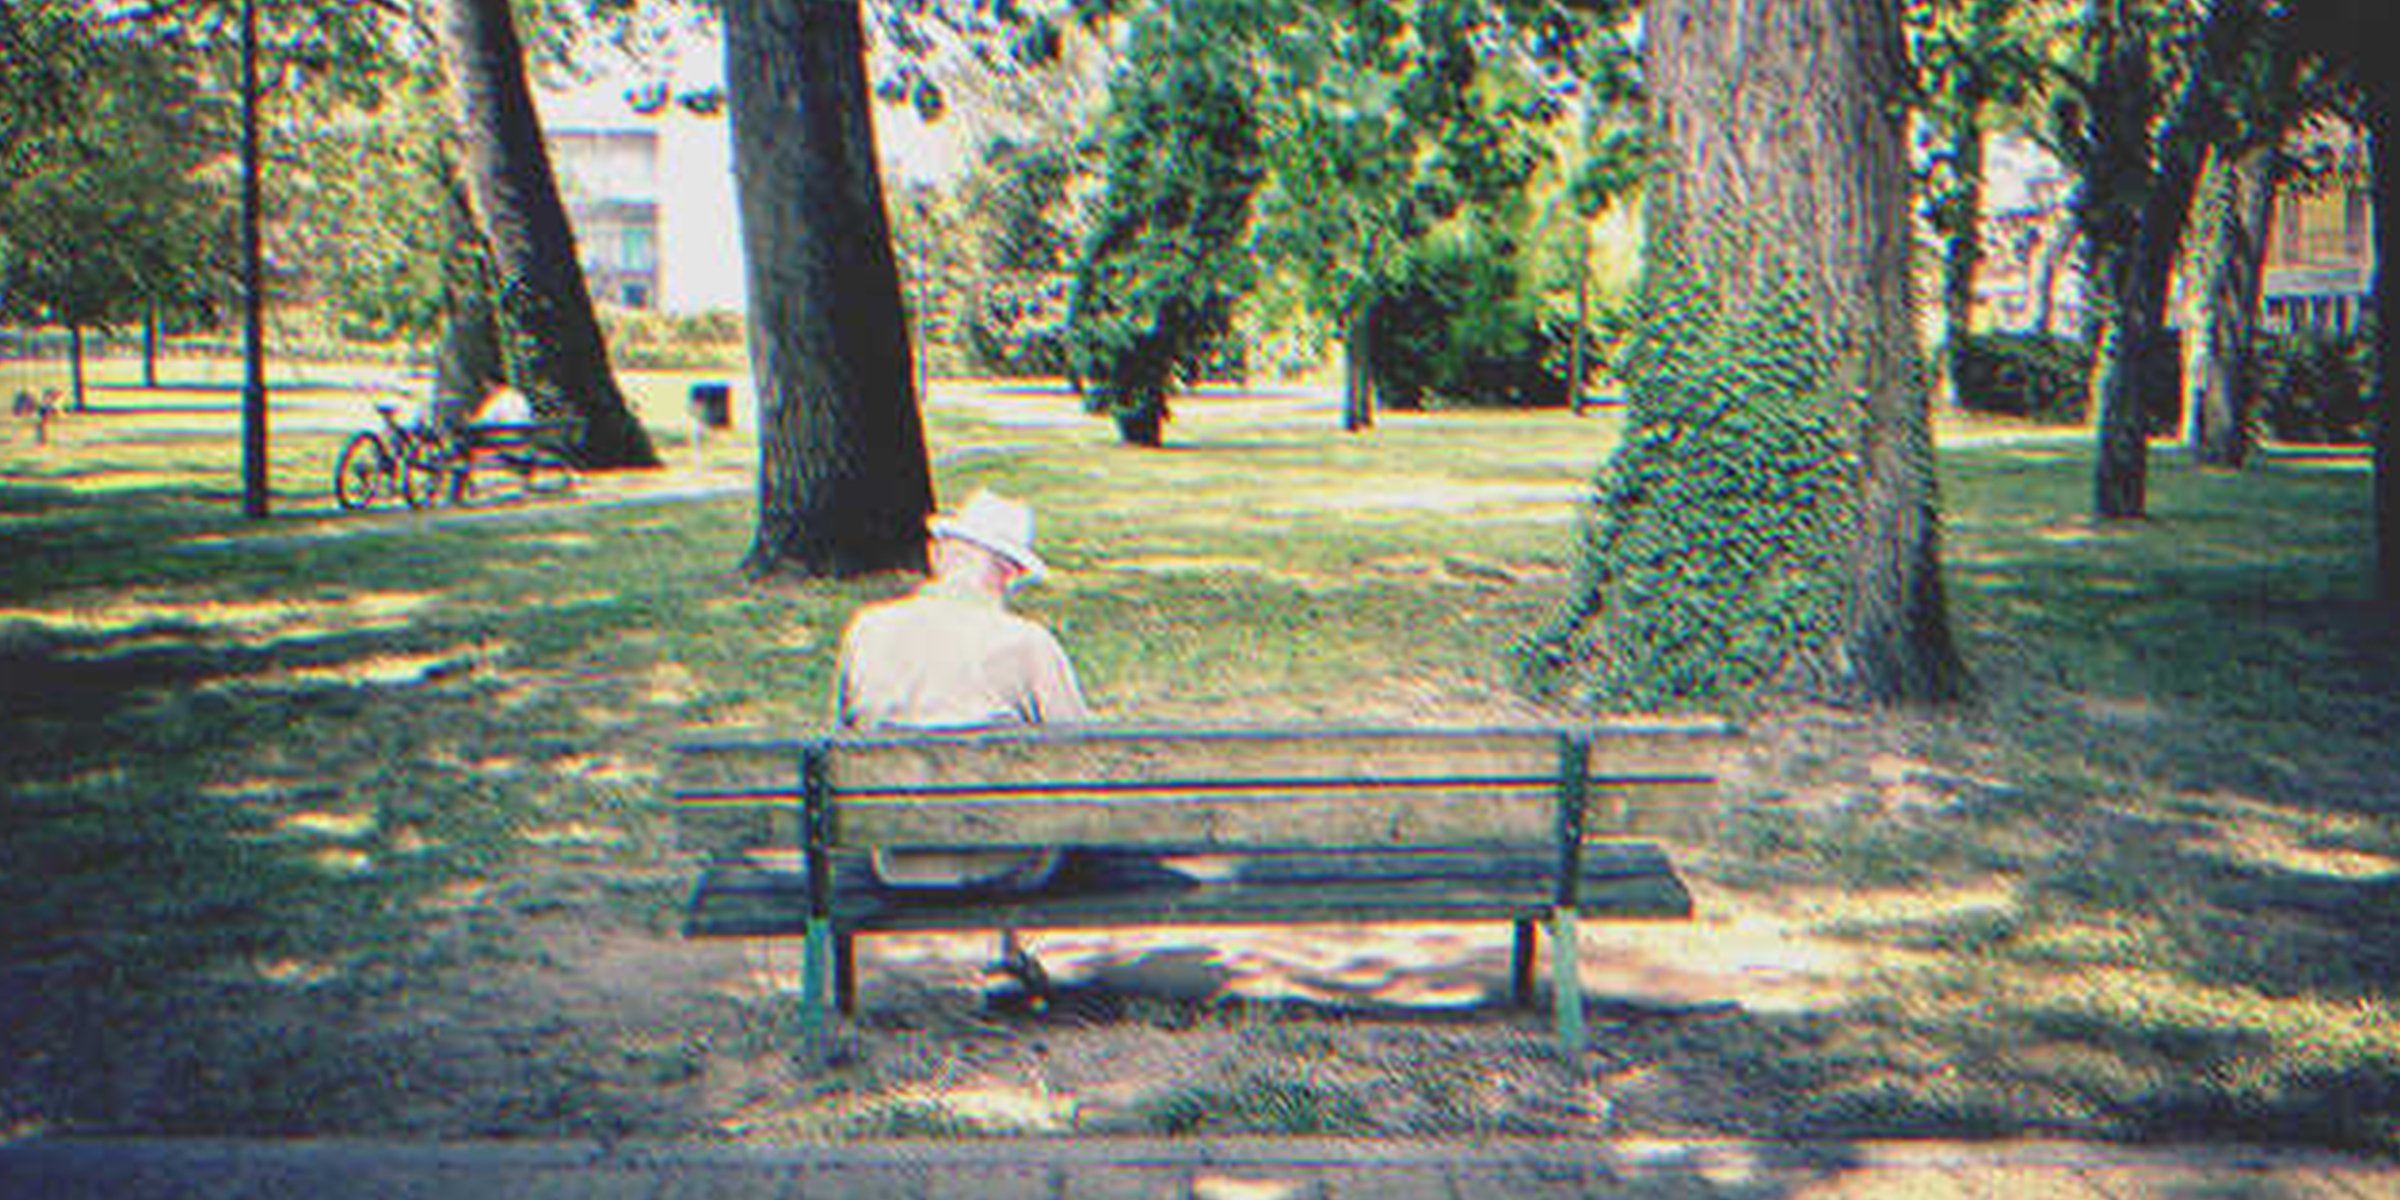 An old man sitting on a bench | Source: Shutterstock